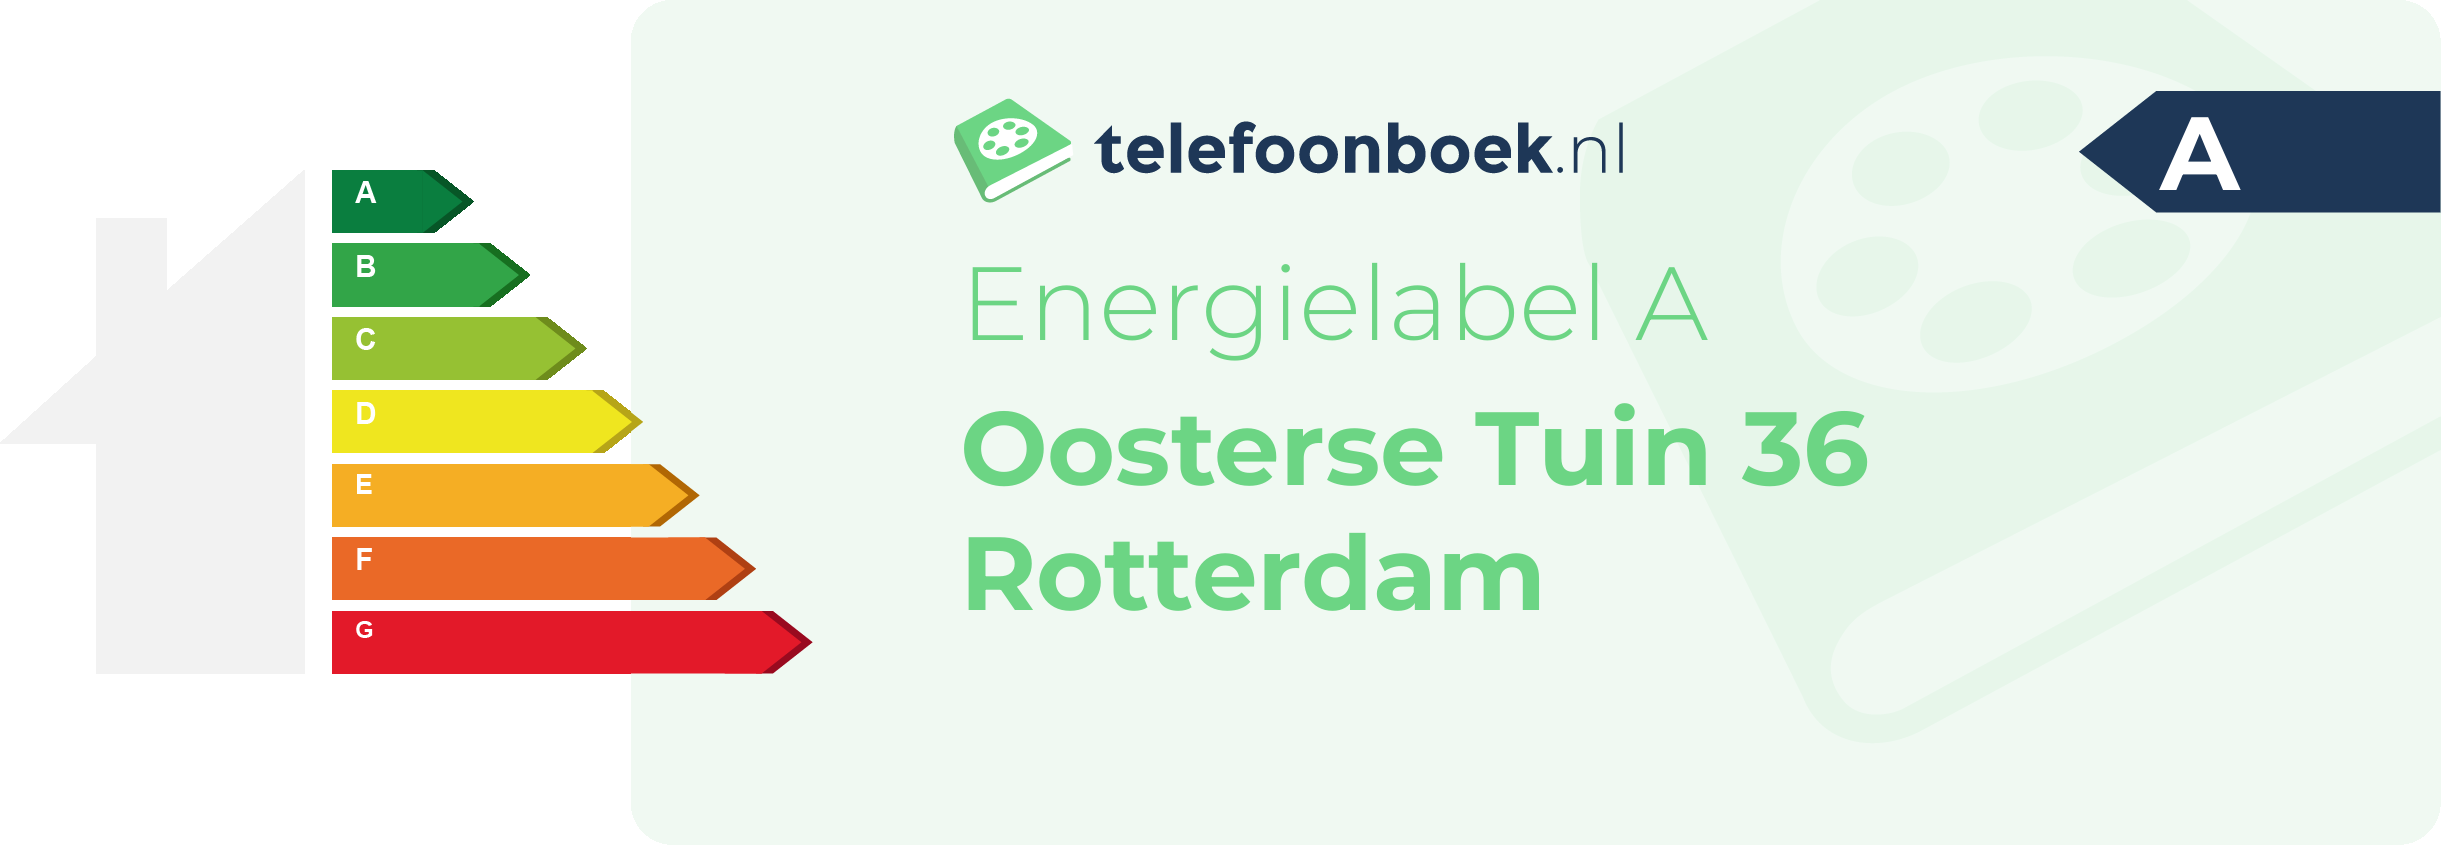 Energielabel Oosterse Tuin 36 Rotterdam